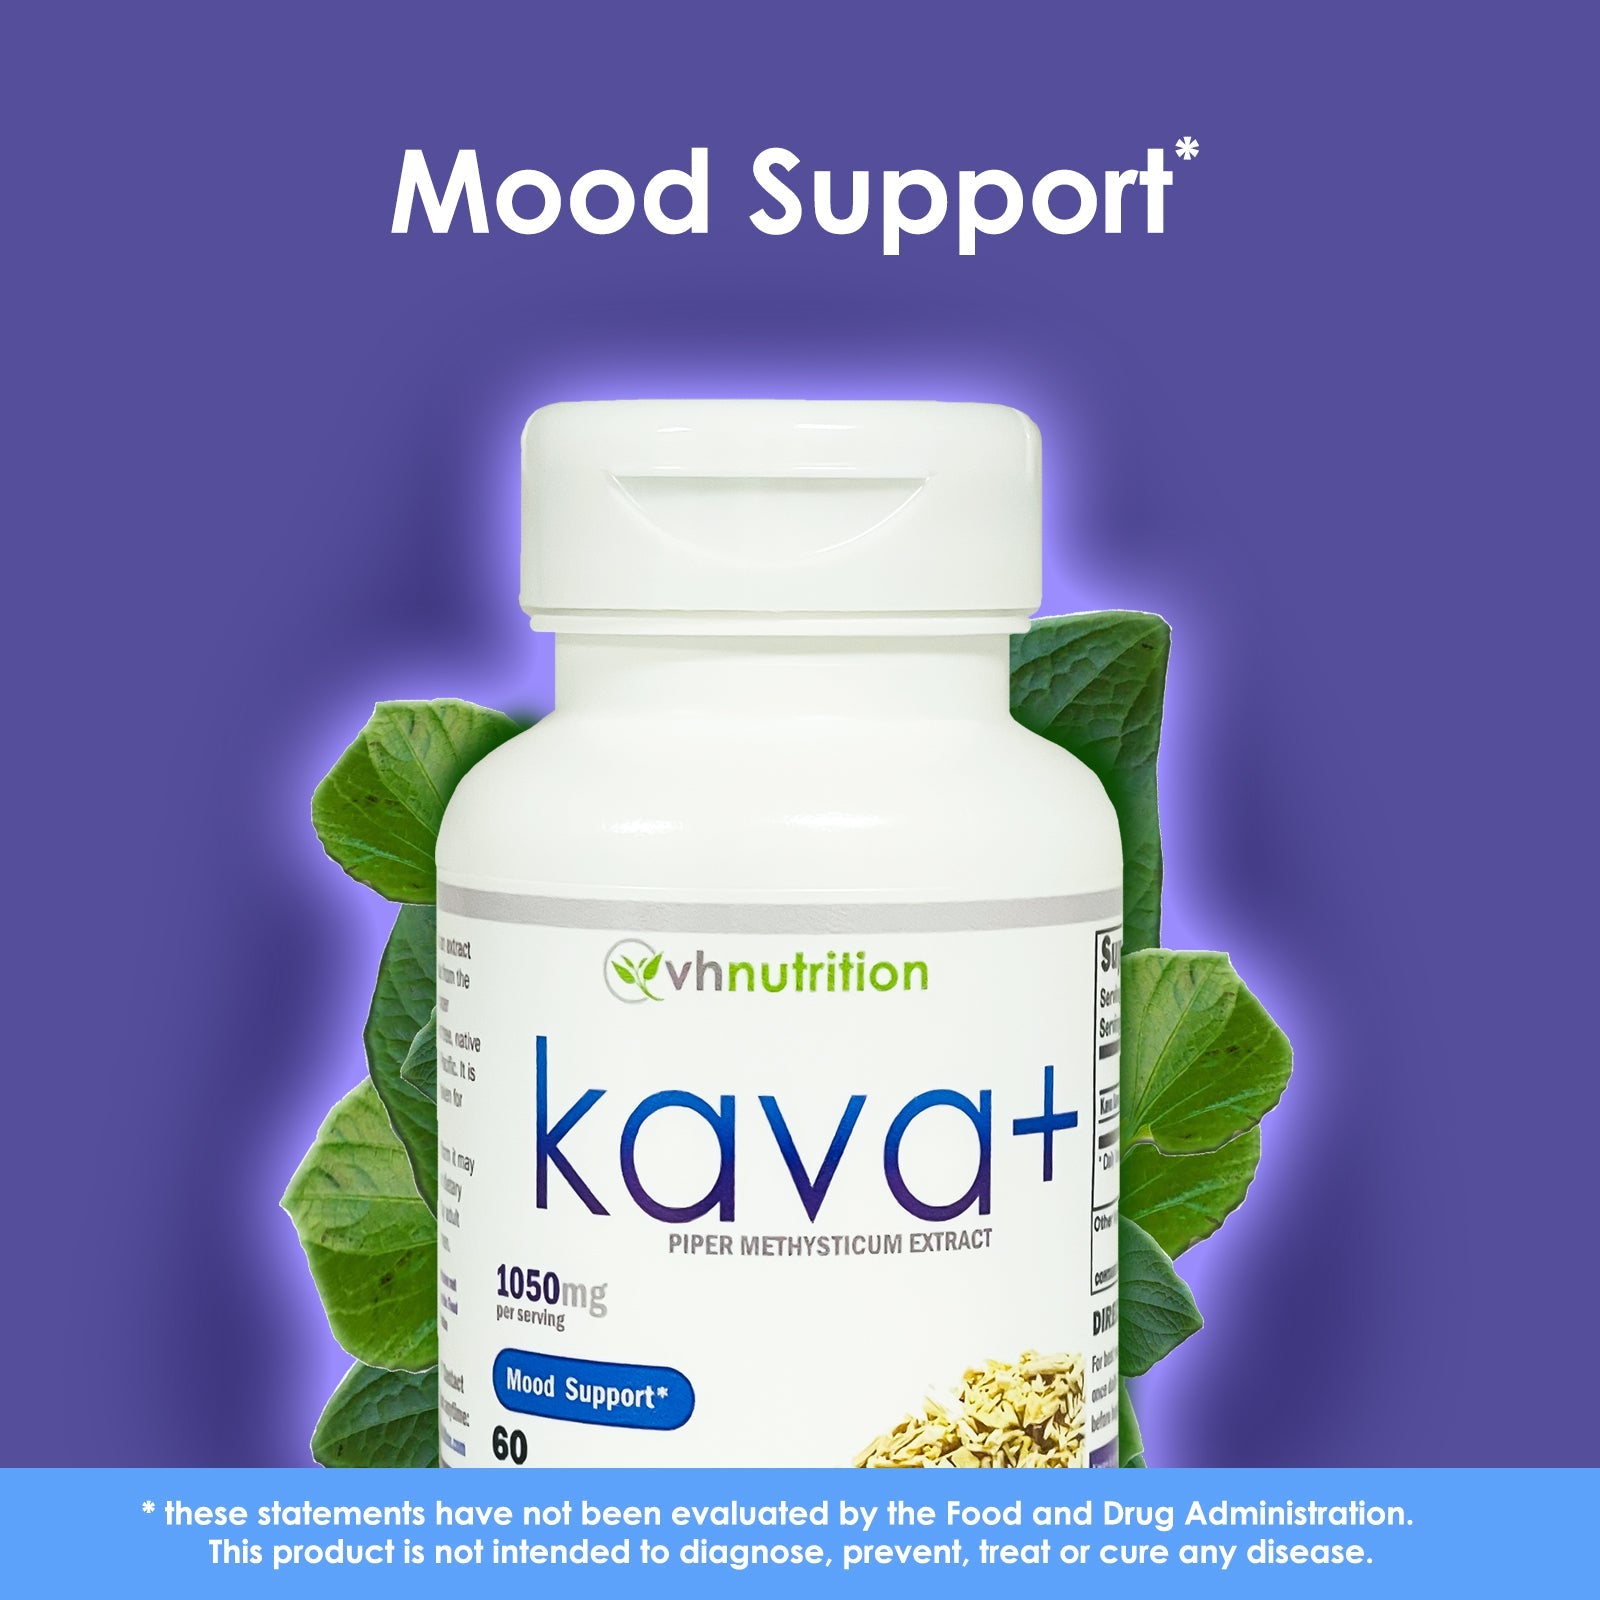 VH Nutrition KAVA+ | Kava kava Capsules | 1050mg Piper Methysticum + Kavalactones | Mood Support* Supplement | 60 Capsules